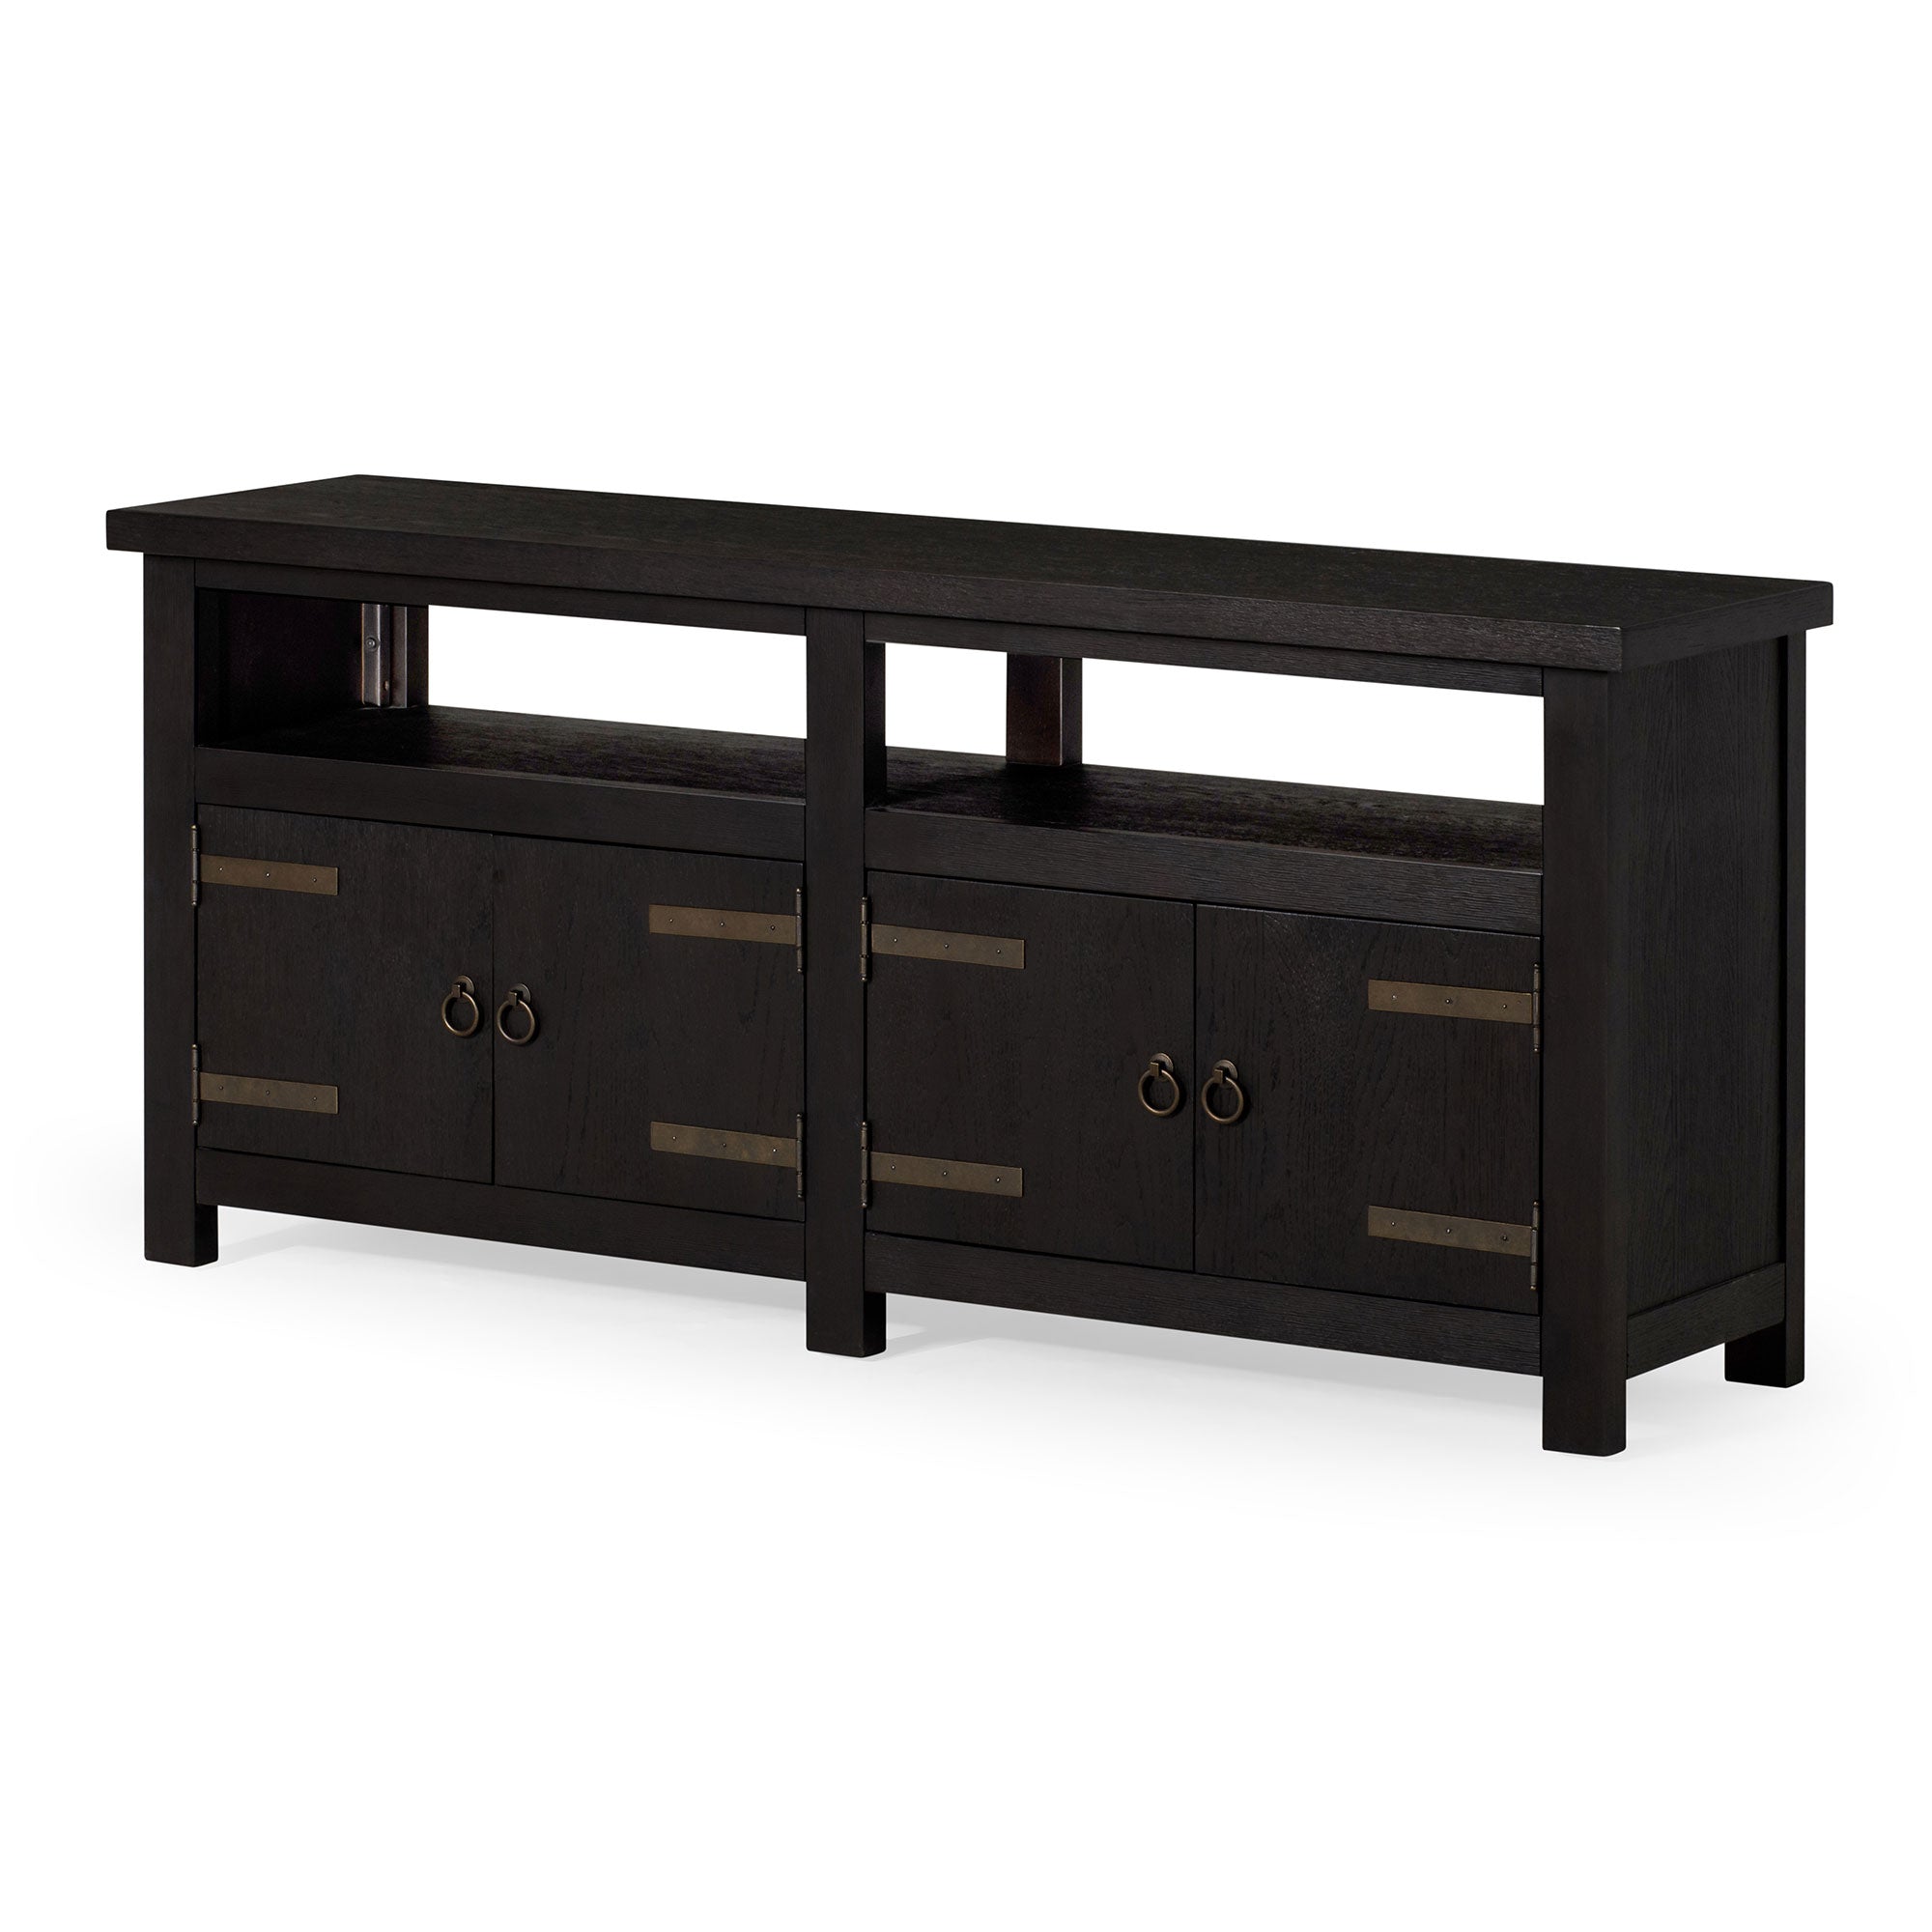 Maven-Lane-Luca-Rustic-Wooden-Media-Unit-in-Weathered-Black-Finish-Entertainment-Centers-&-TV-Stands